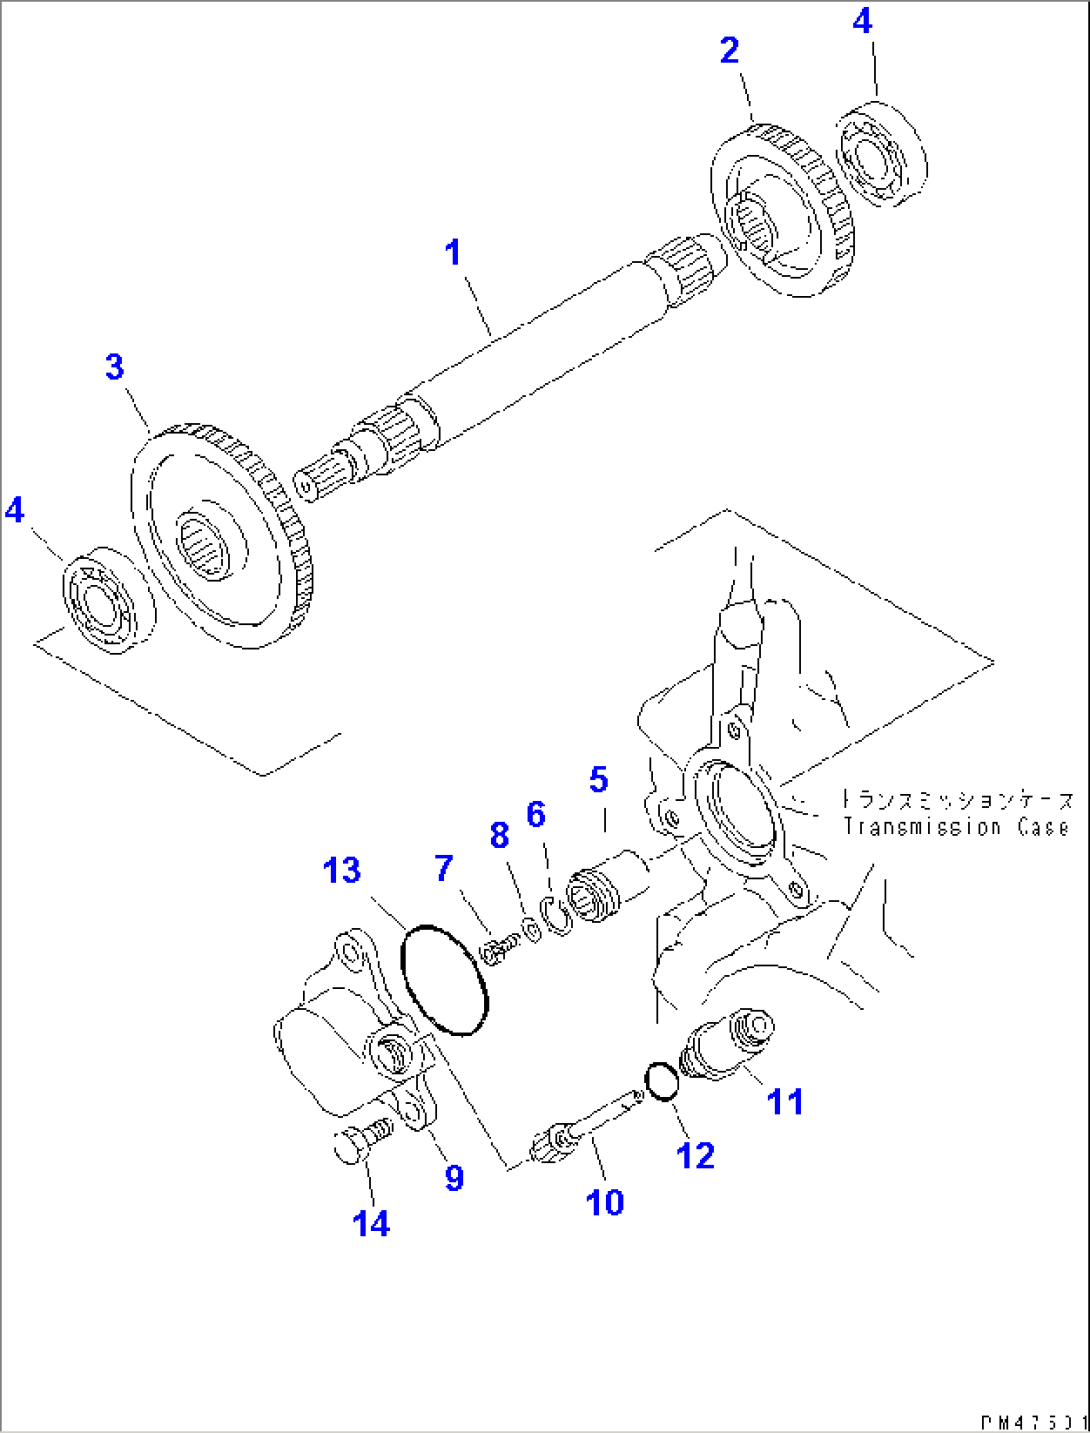 TRANSMISSION (3RD AND 4TH GEAR)(#60001-)